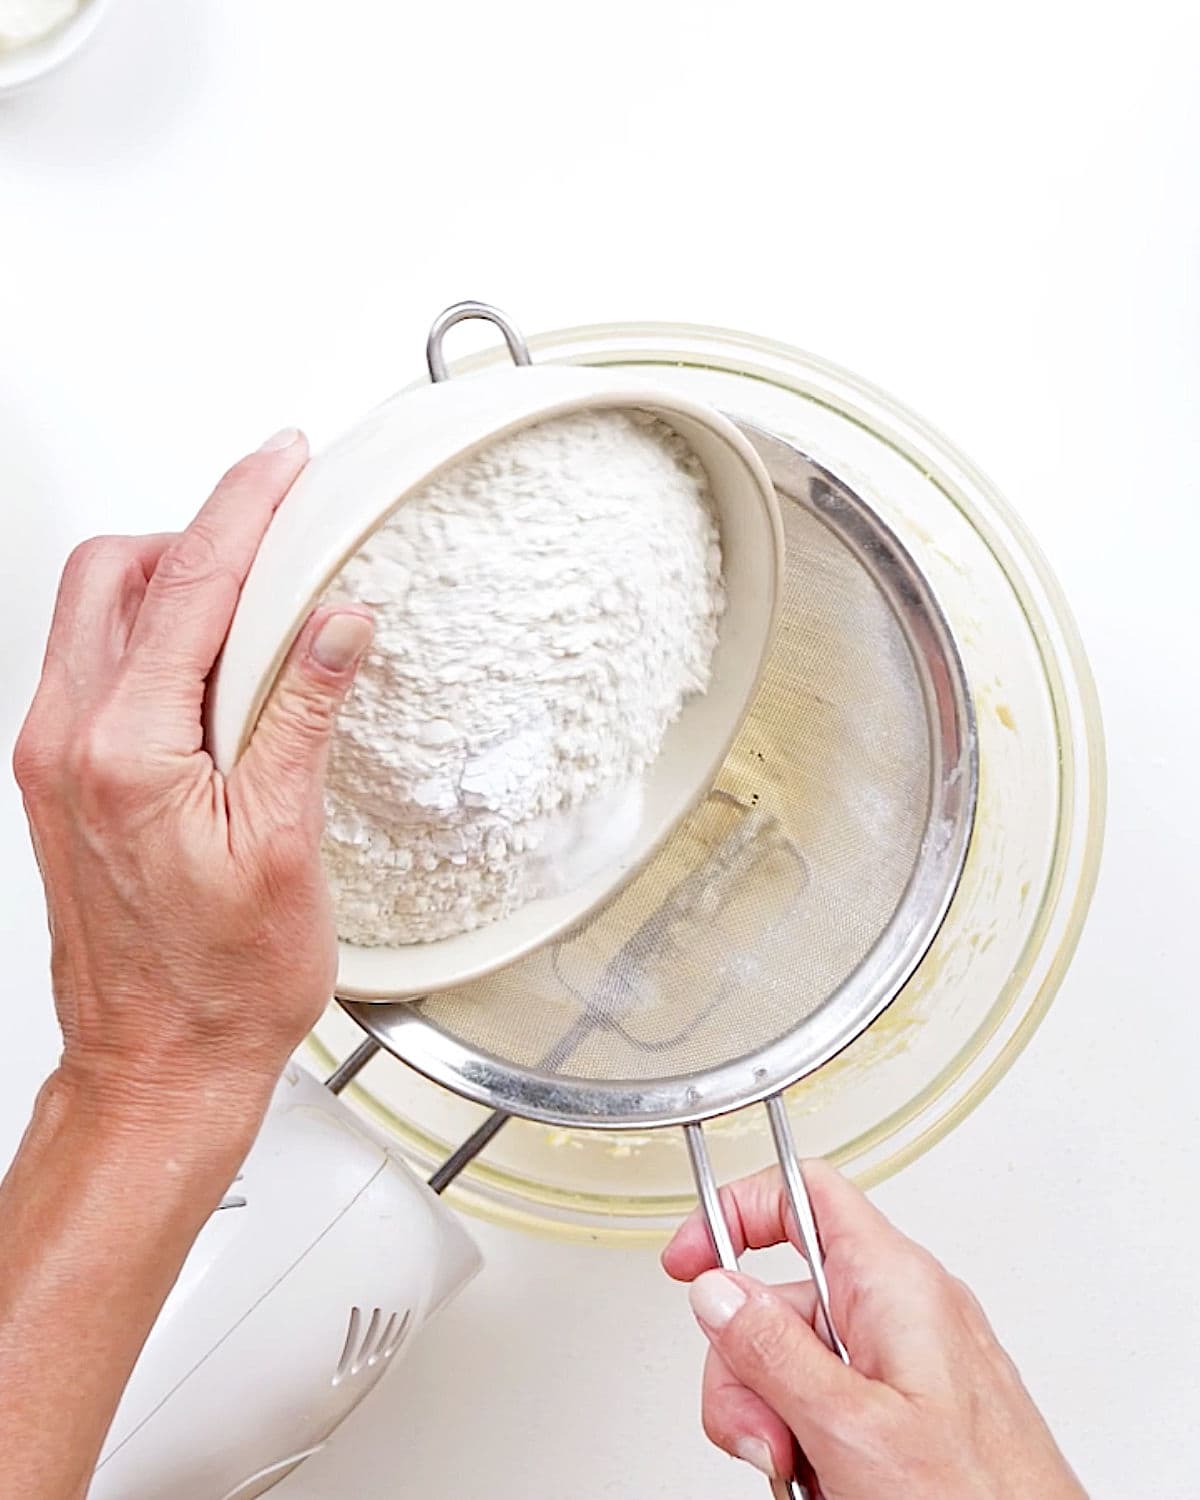 Sifting flour over glass bowl with cake batter. White surface.